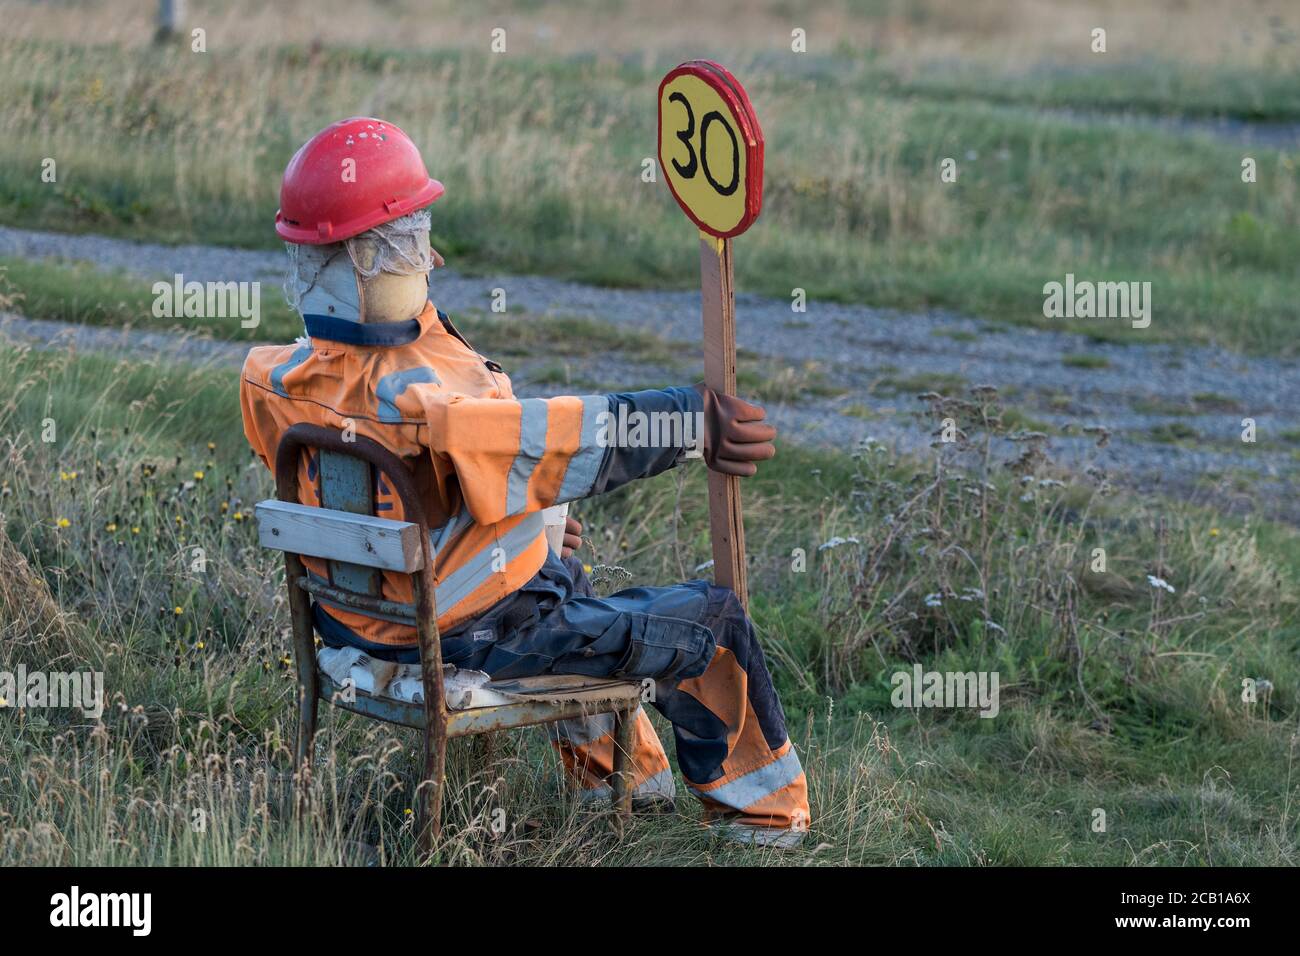 Doll in street worker's outfit holding sign, warning of speed limit in local area, Hvallatur, Westfjords, Iceland Stock Photo